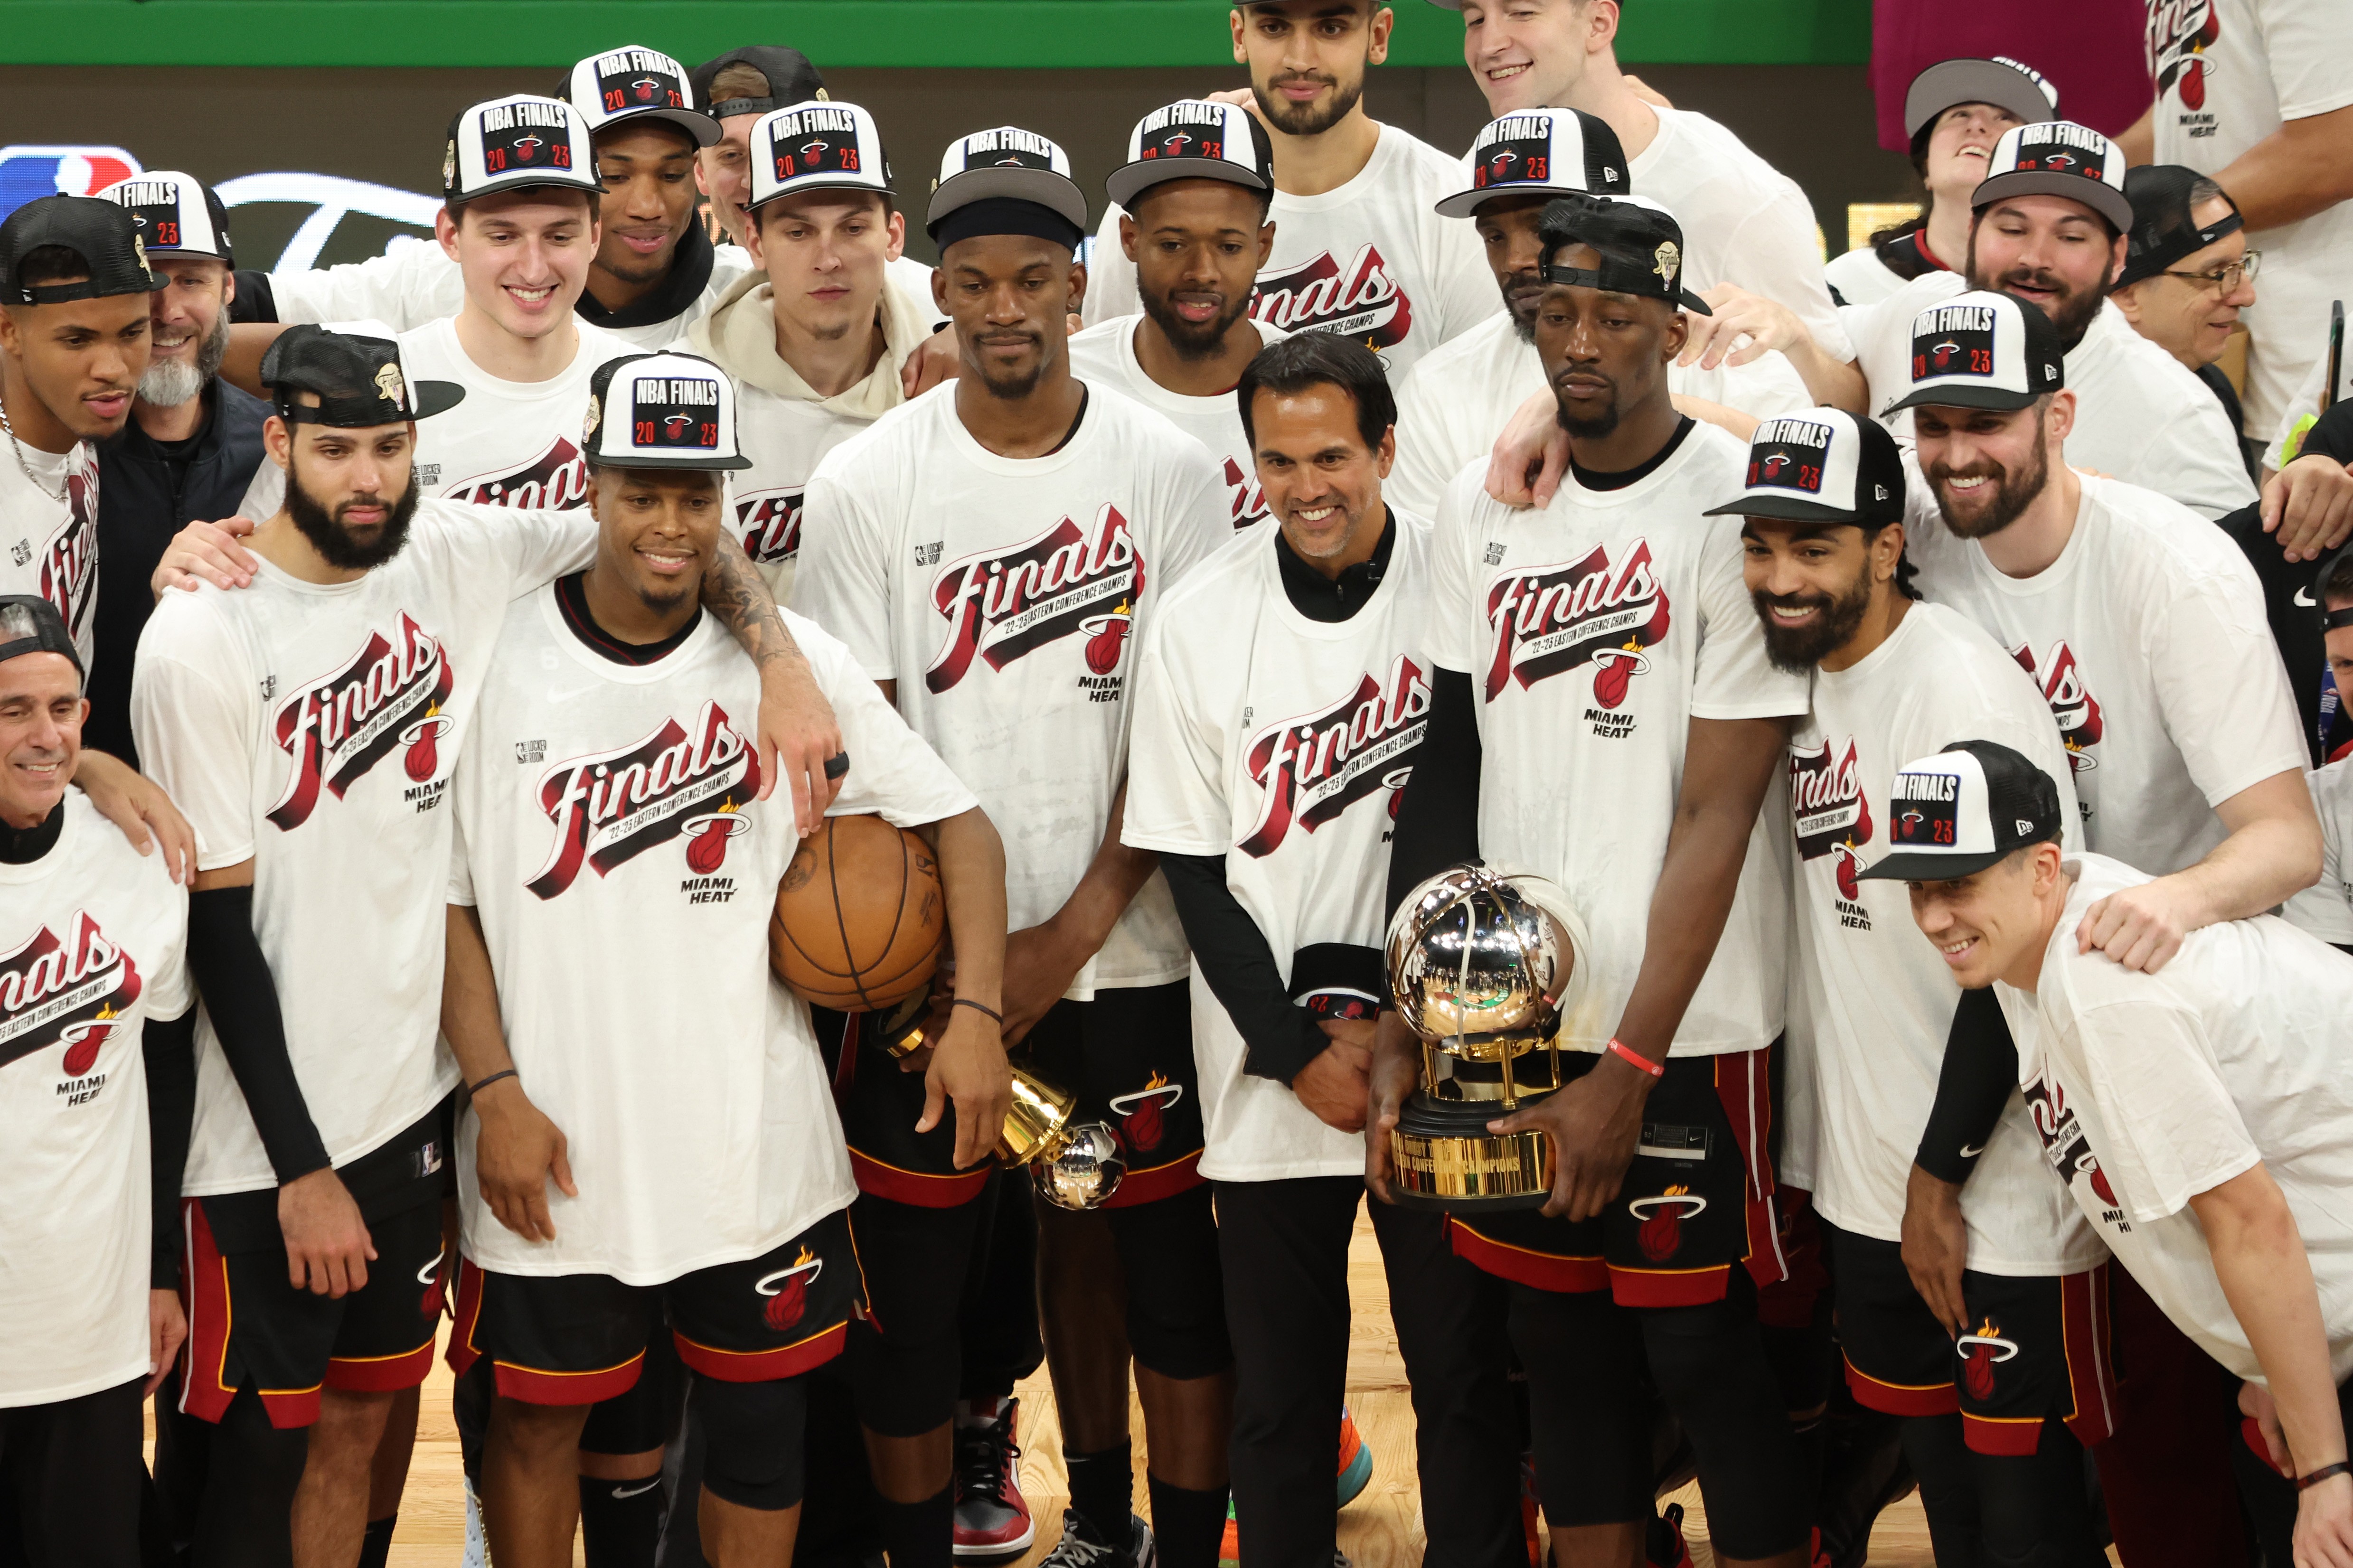 Our Favorite Moments From The 2013 Miami Heat Championship Season